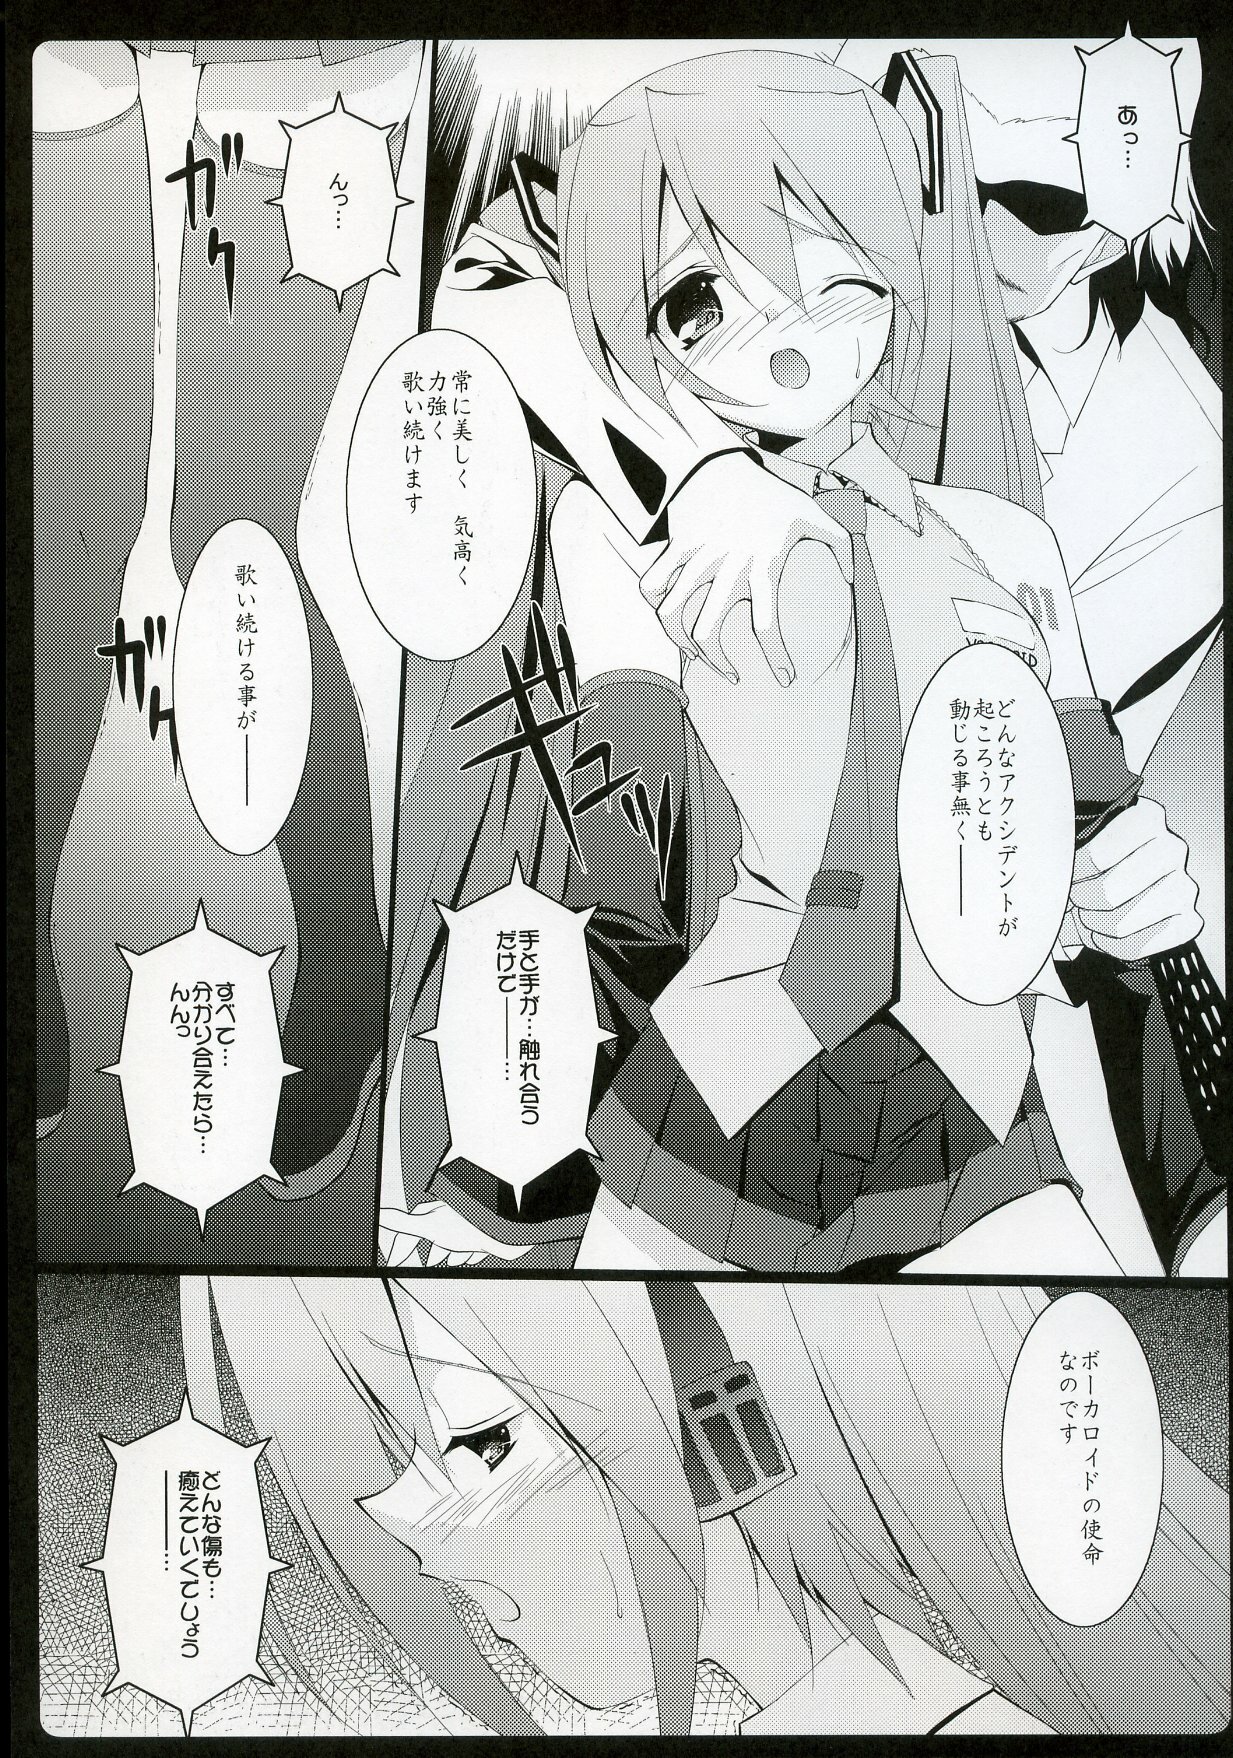 (C73) [URA FMO (Fumio)] It only sings (Vocaloid2) page 6 full